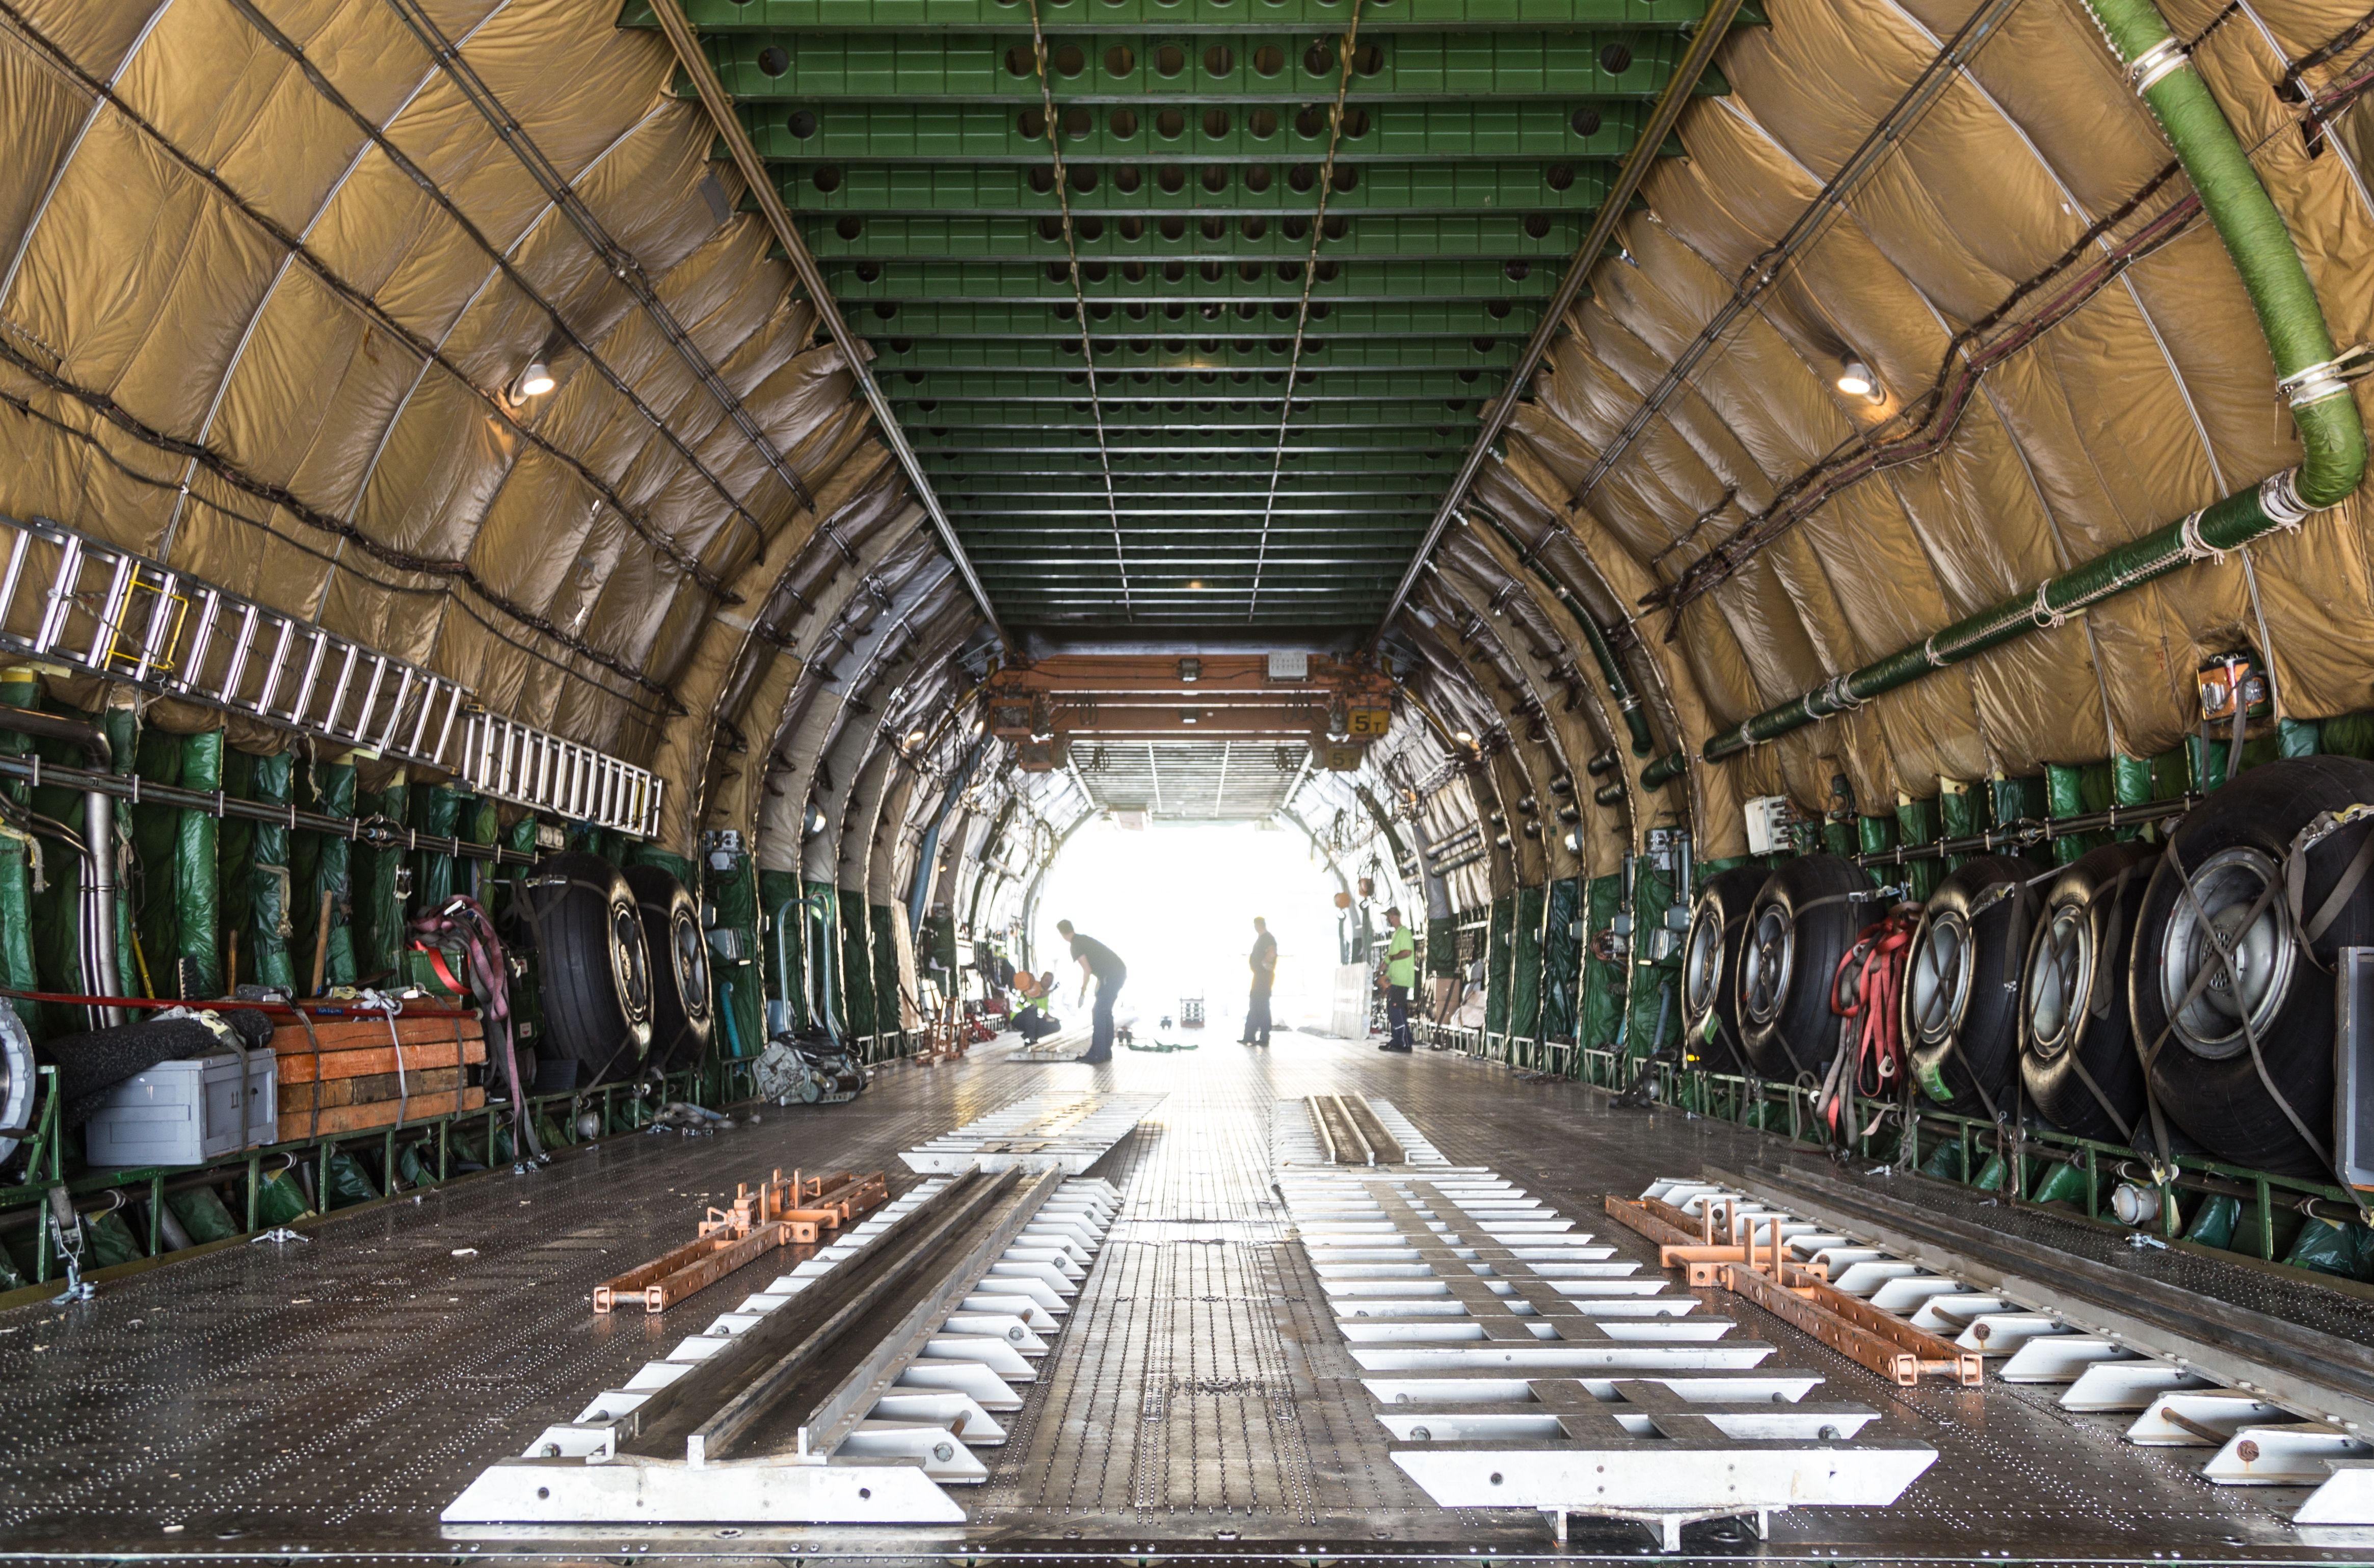 Main cargo hold of the An-124.